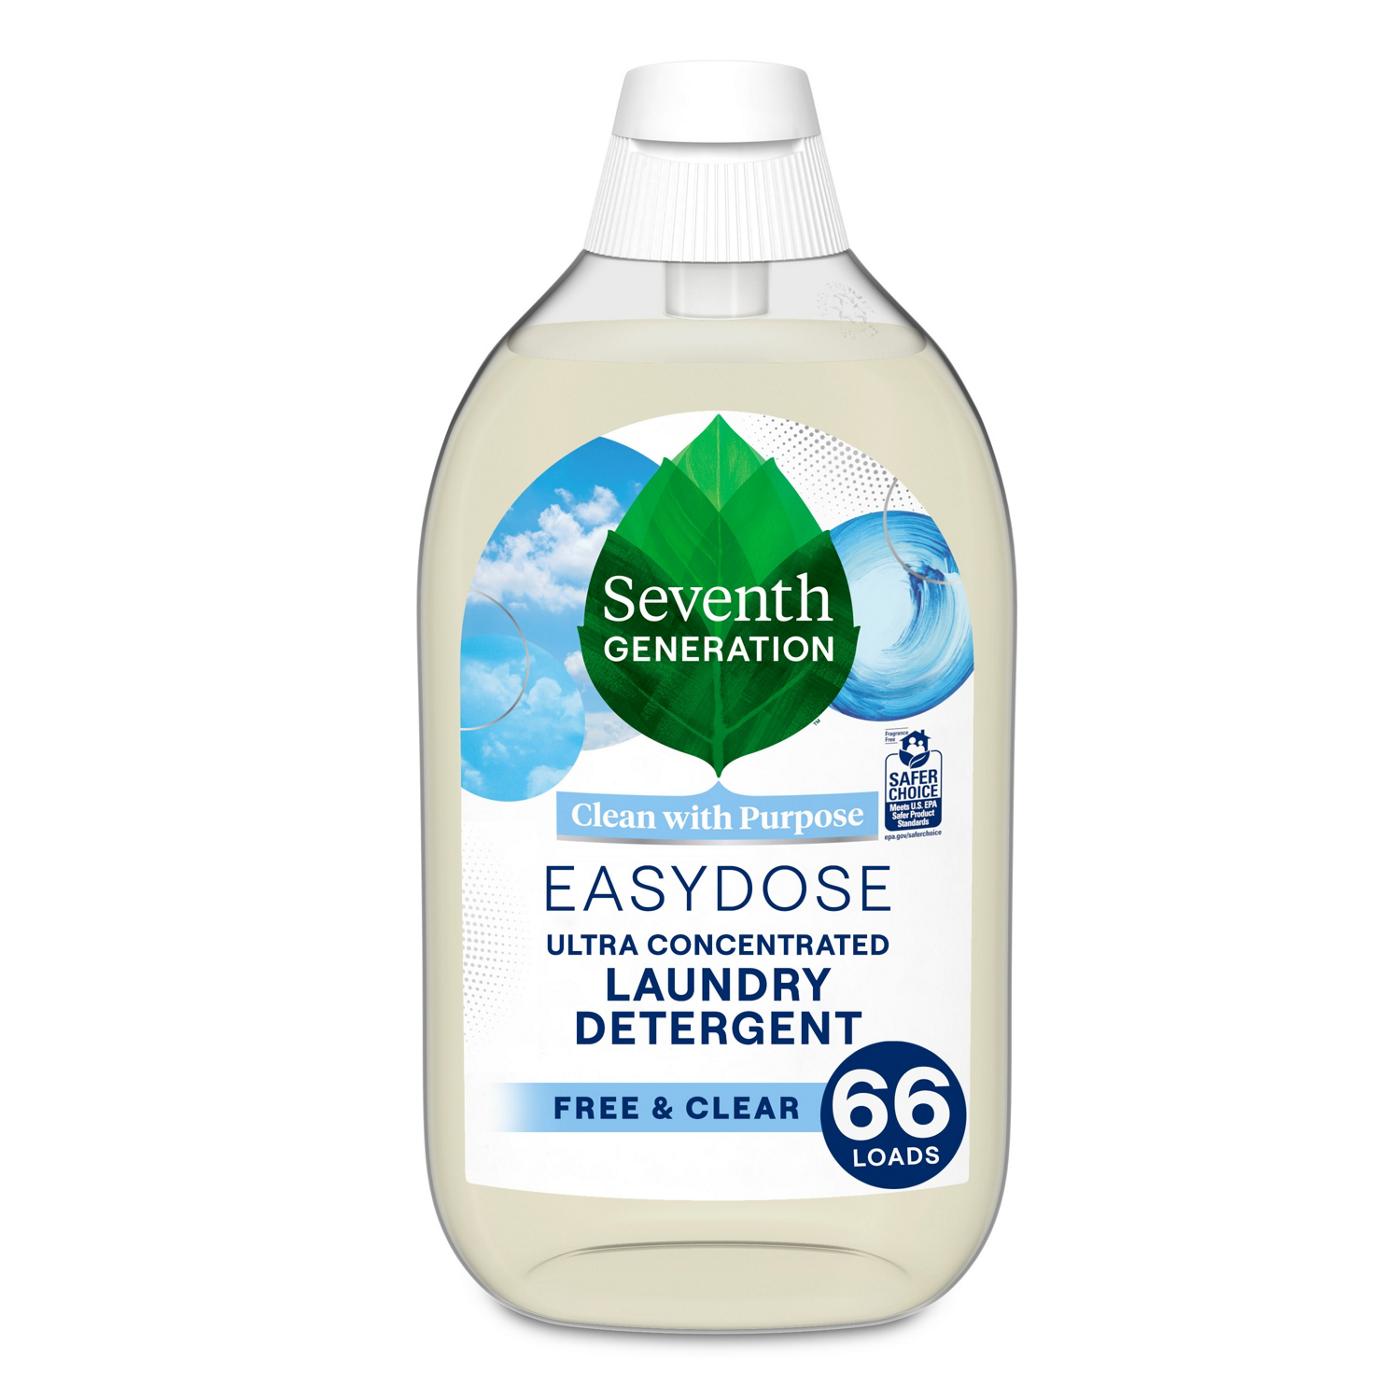 Seventh Generation EasyDose Ultra Concentrated HE Laundry Detergent, 66 Loads - Free & Clear; image 1 of 14